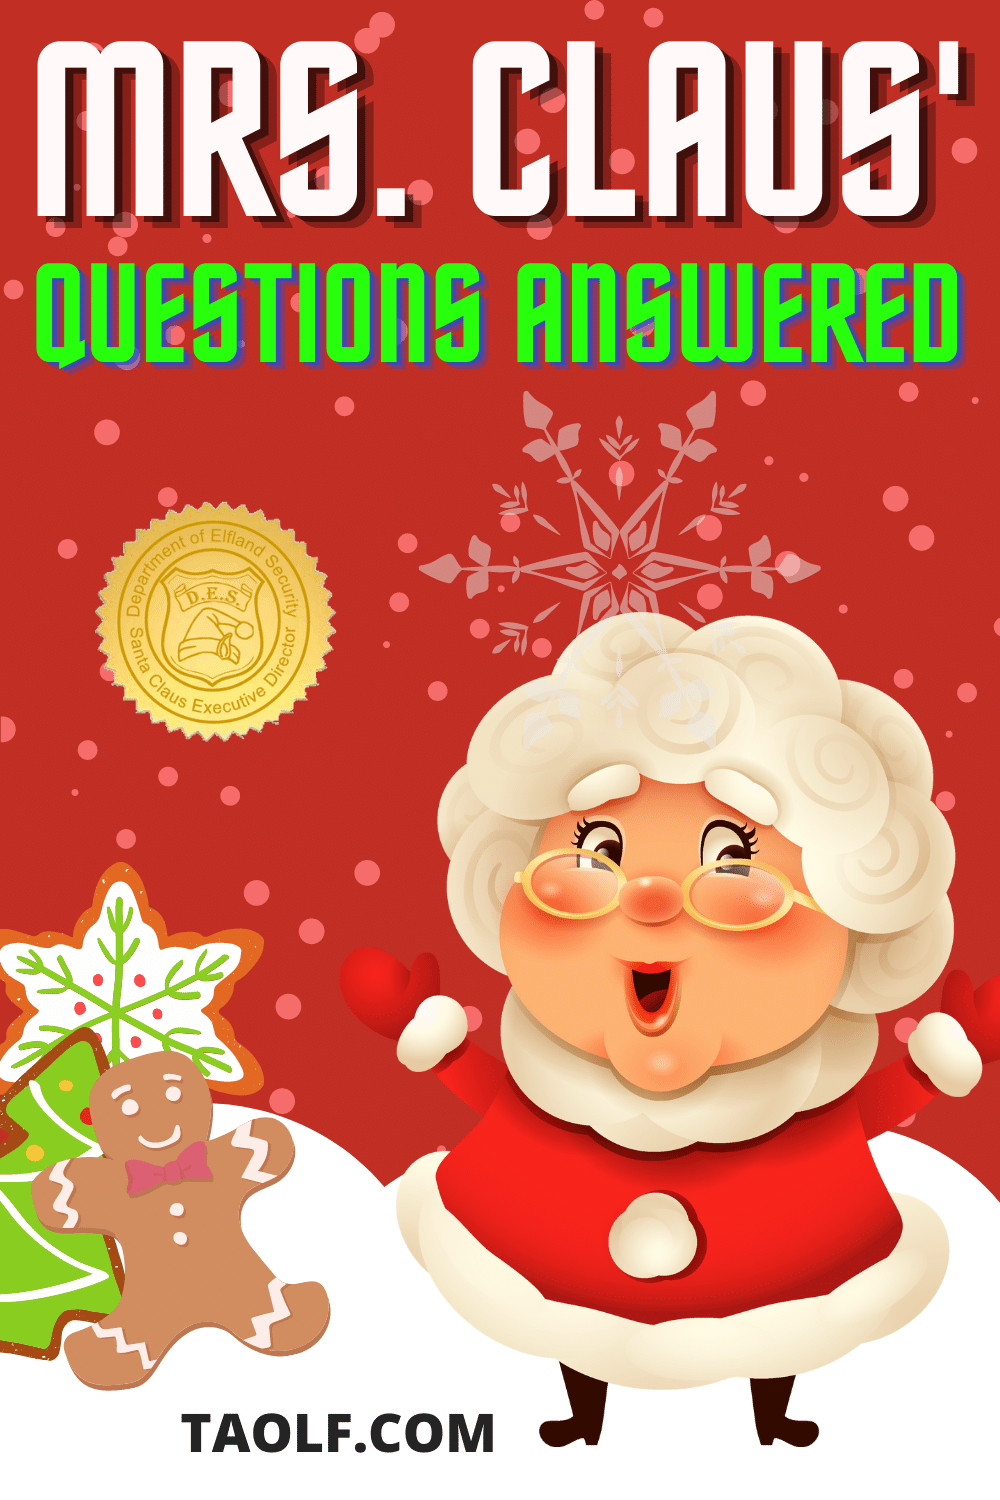 Mrs. Claus' Frequently Asked Questions